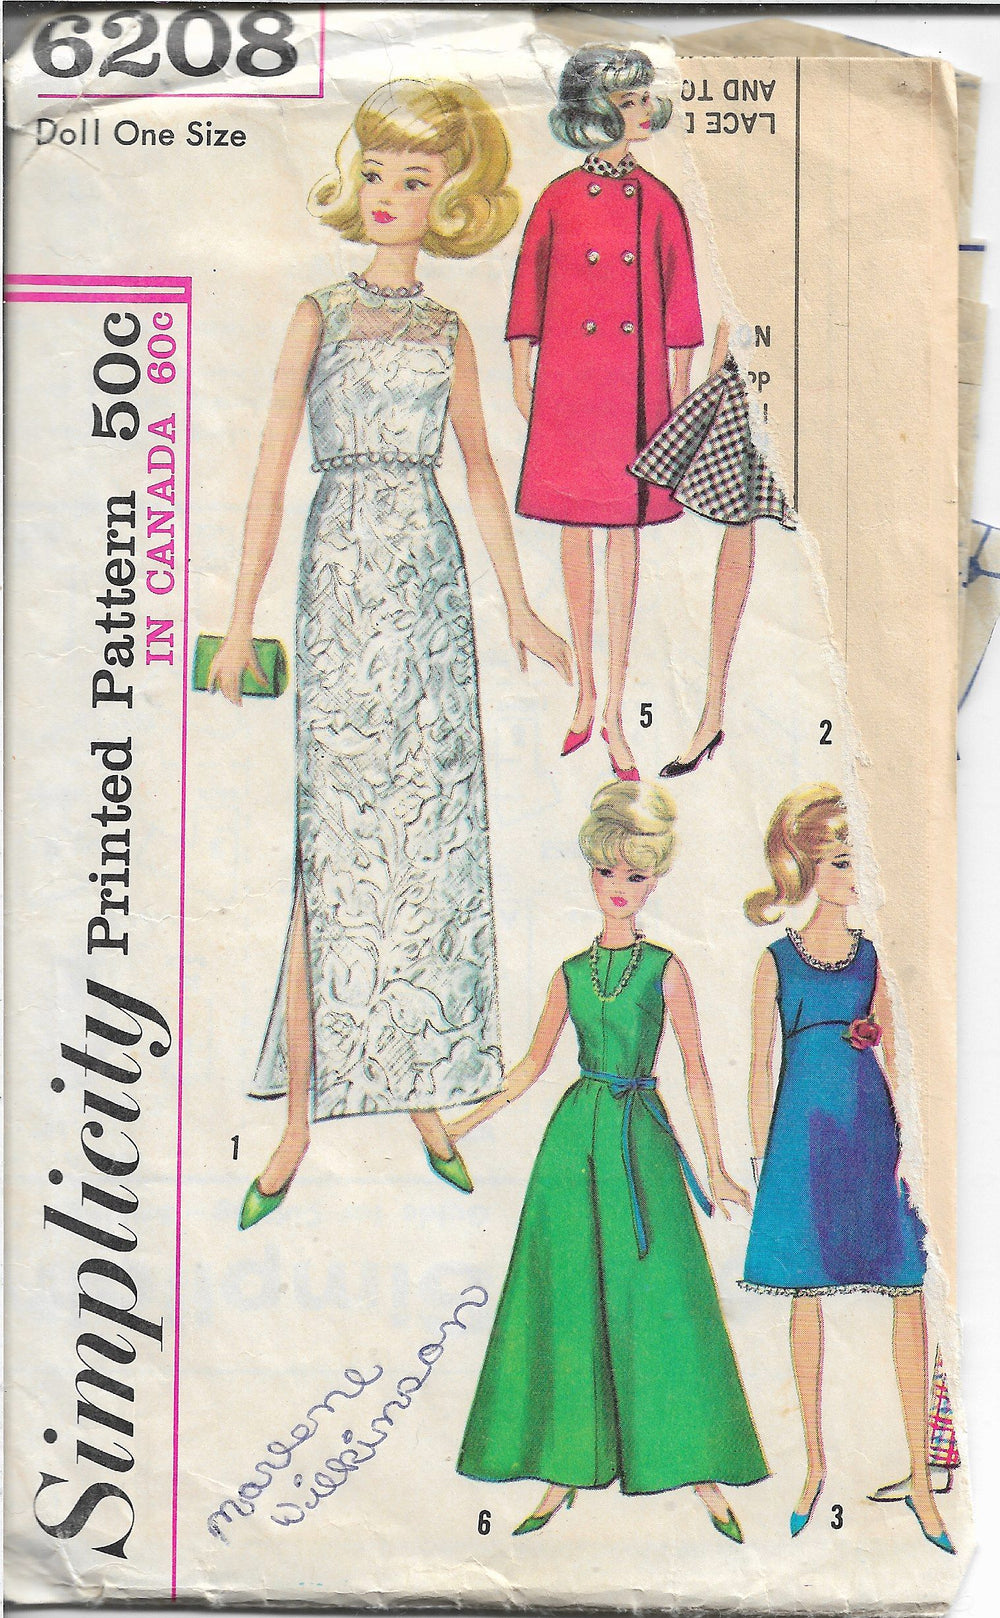 Simplicity 6208 Barbie Doll Clothes Vintage Sewing Craft Pattern 1960s - VintageStitching - Vintage Sewing Patterns